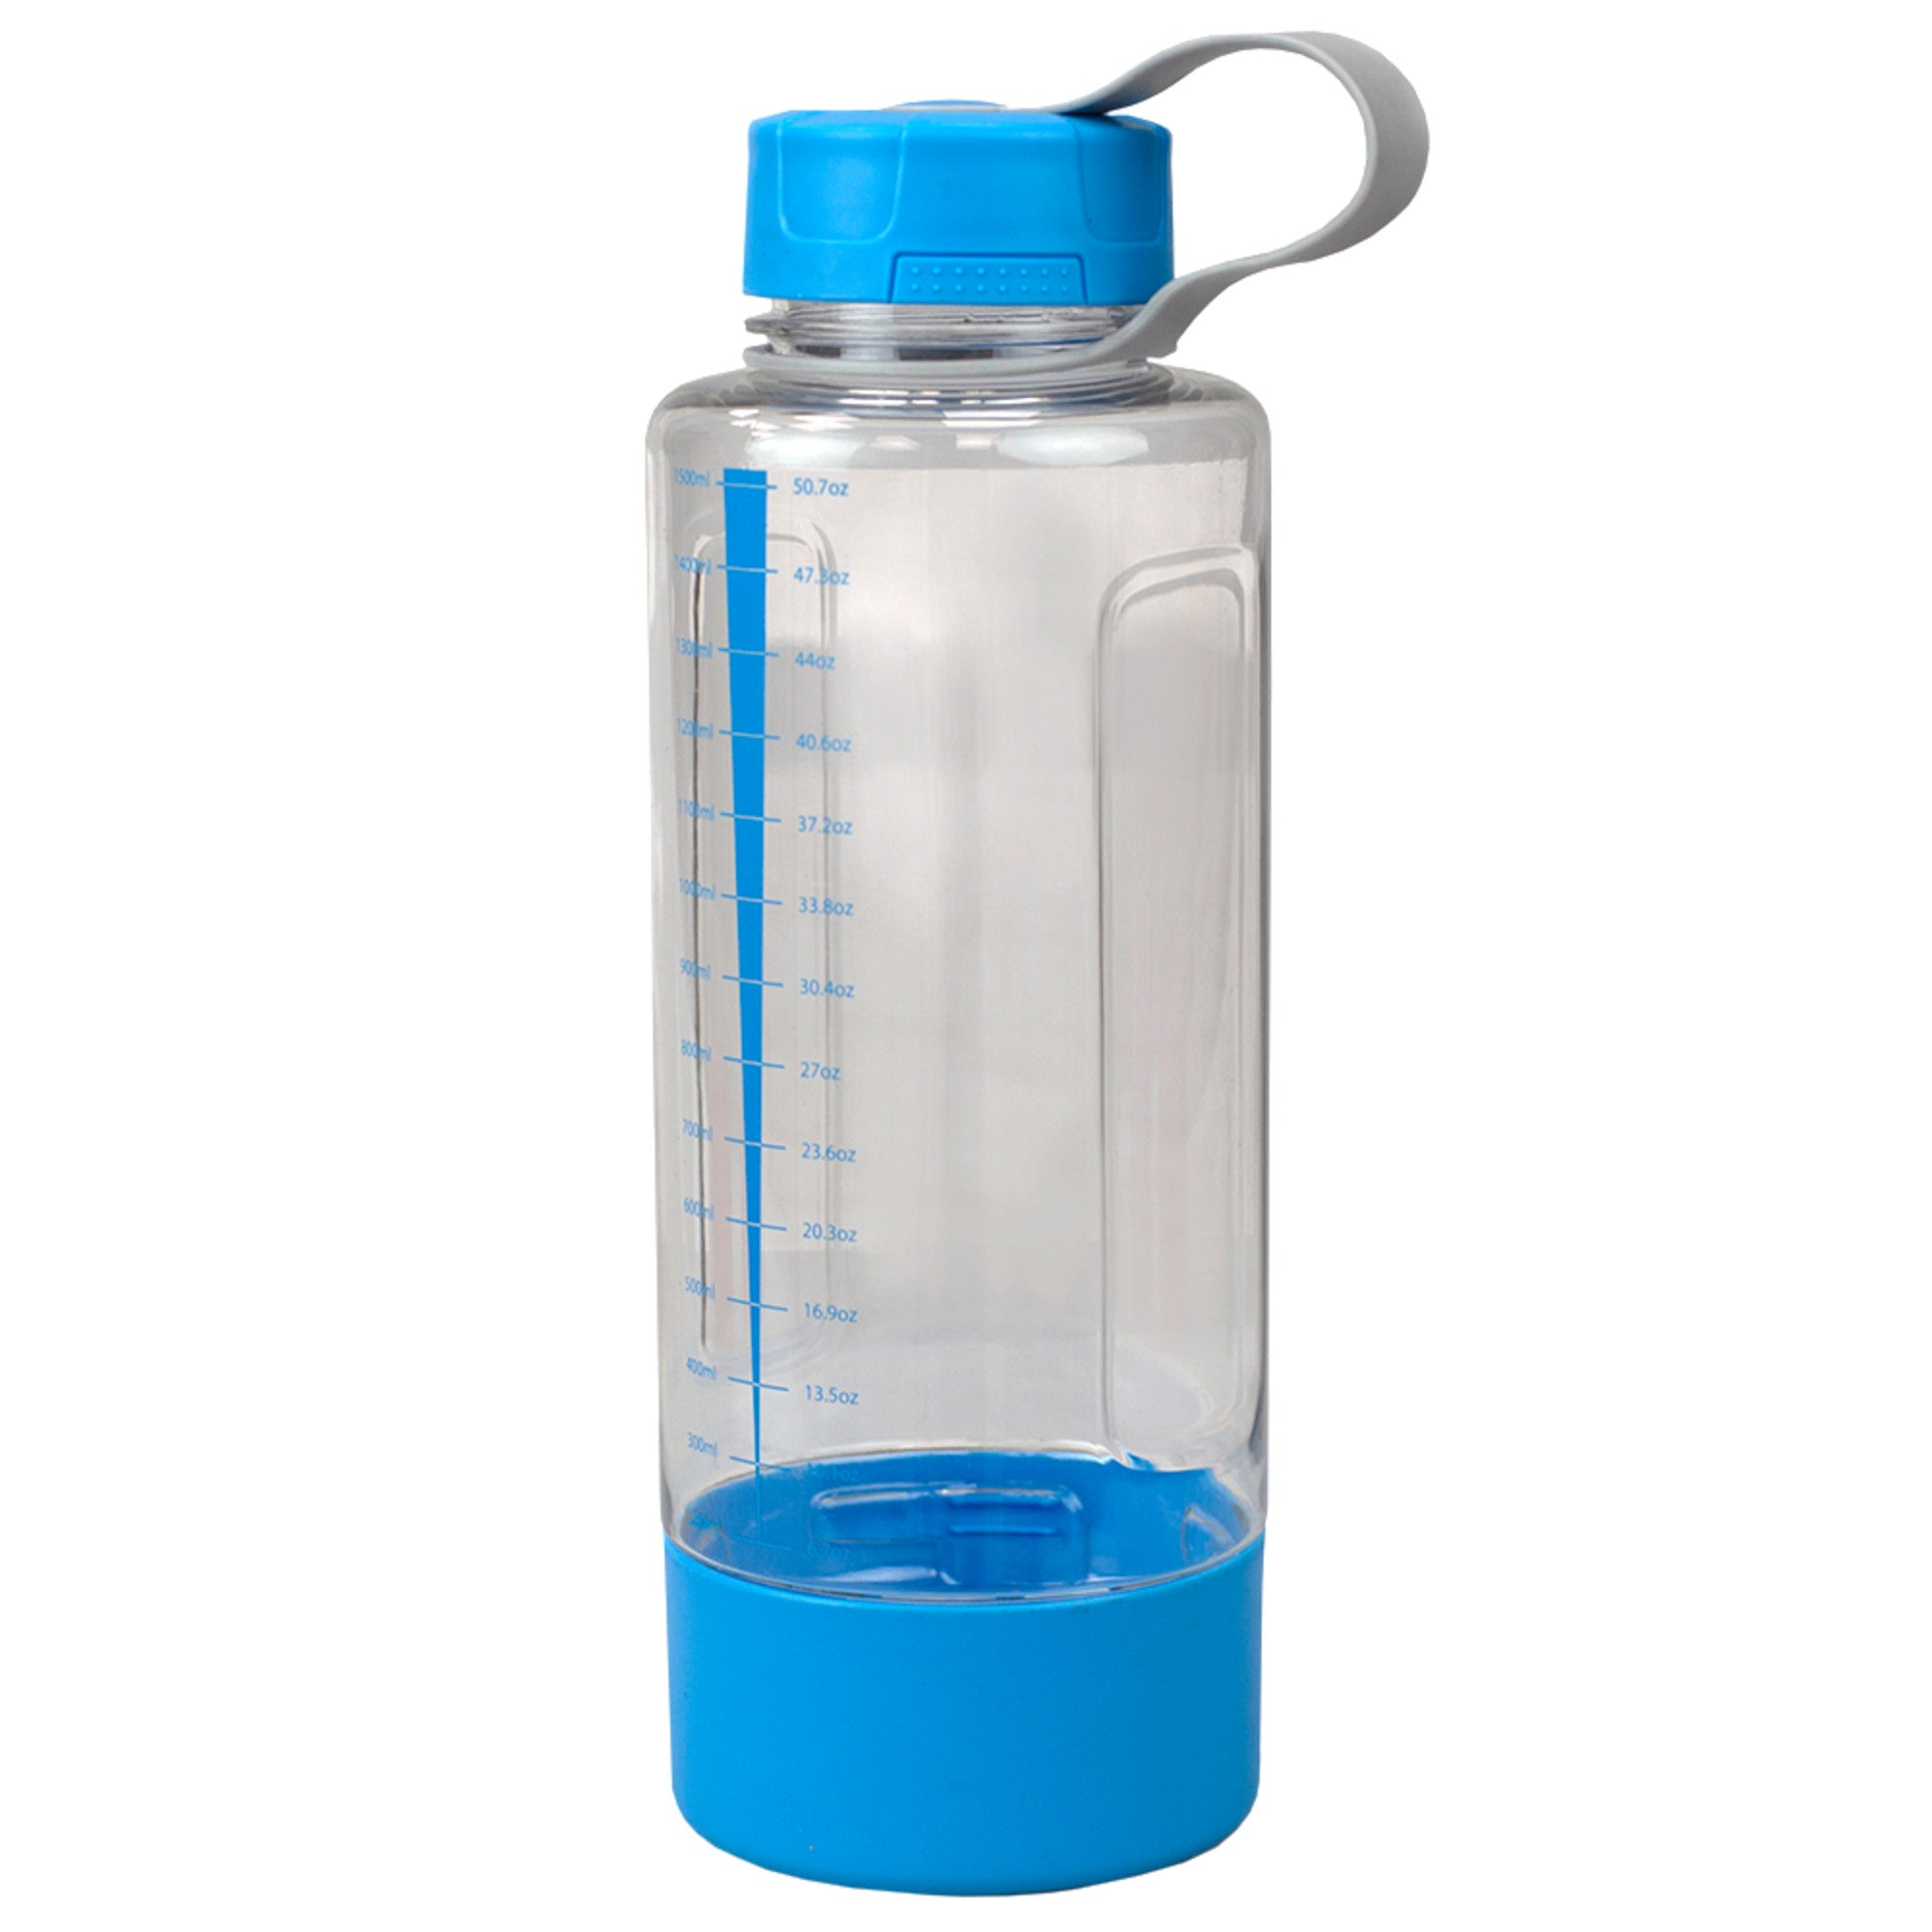 Home Basics  50 oz. Plastic Water Bottle with Measurement Markings - Assorted Colors